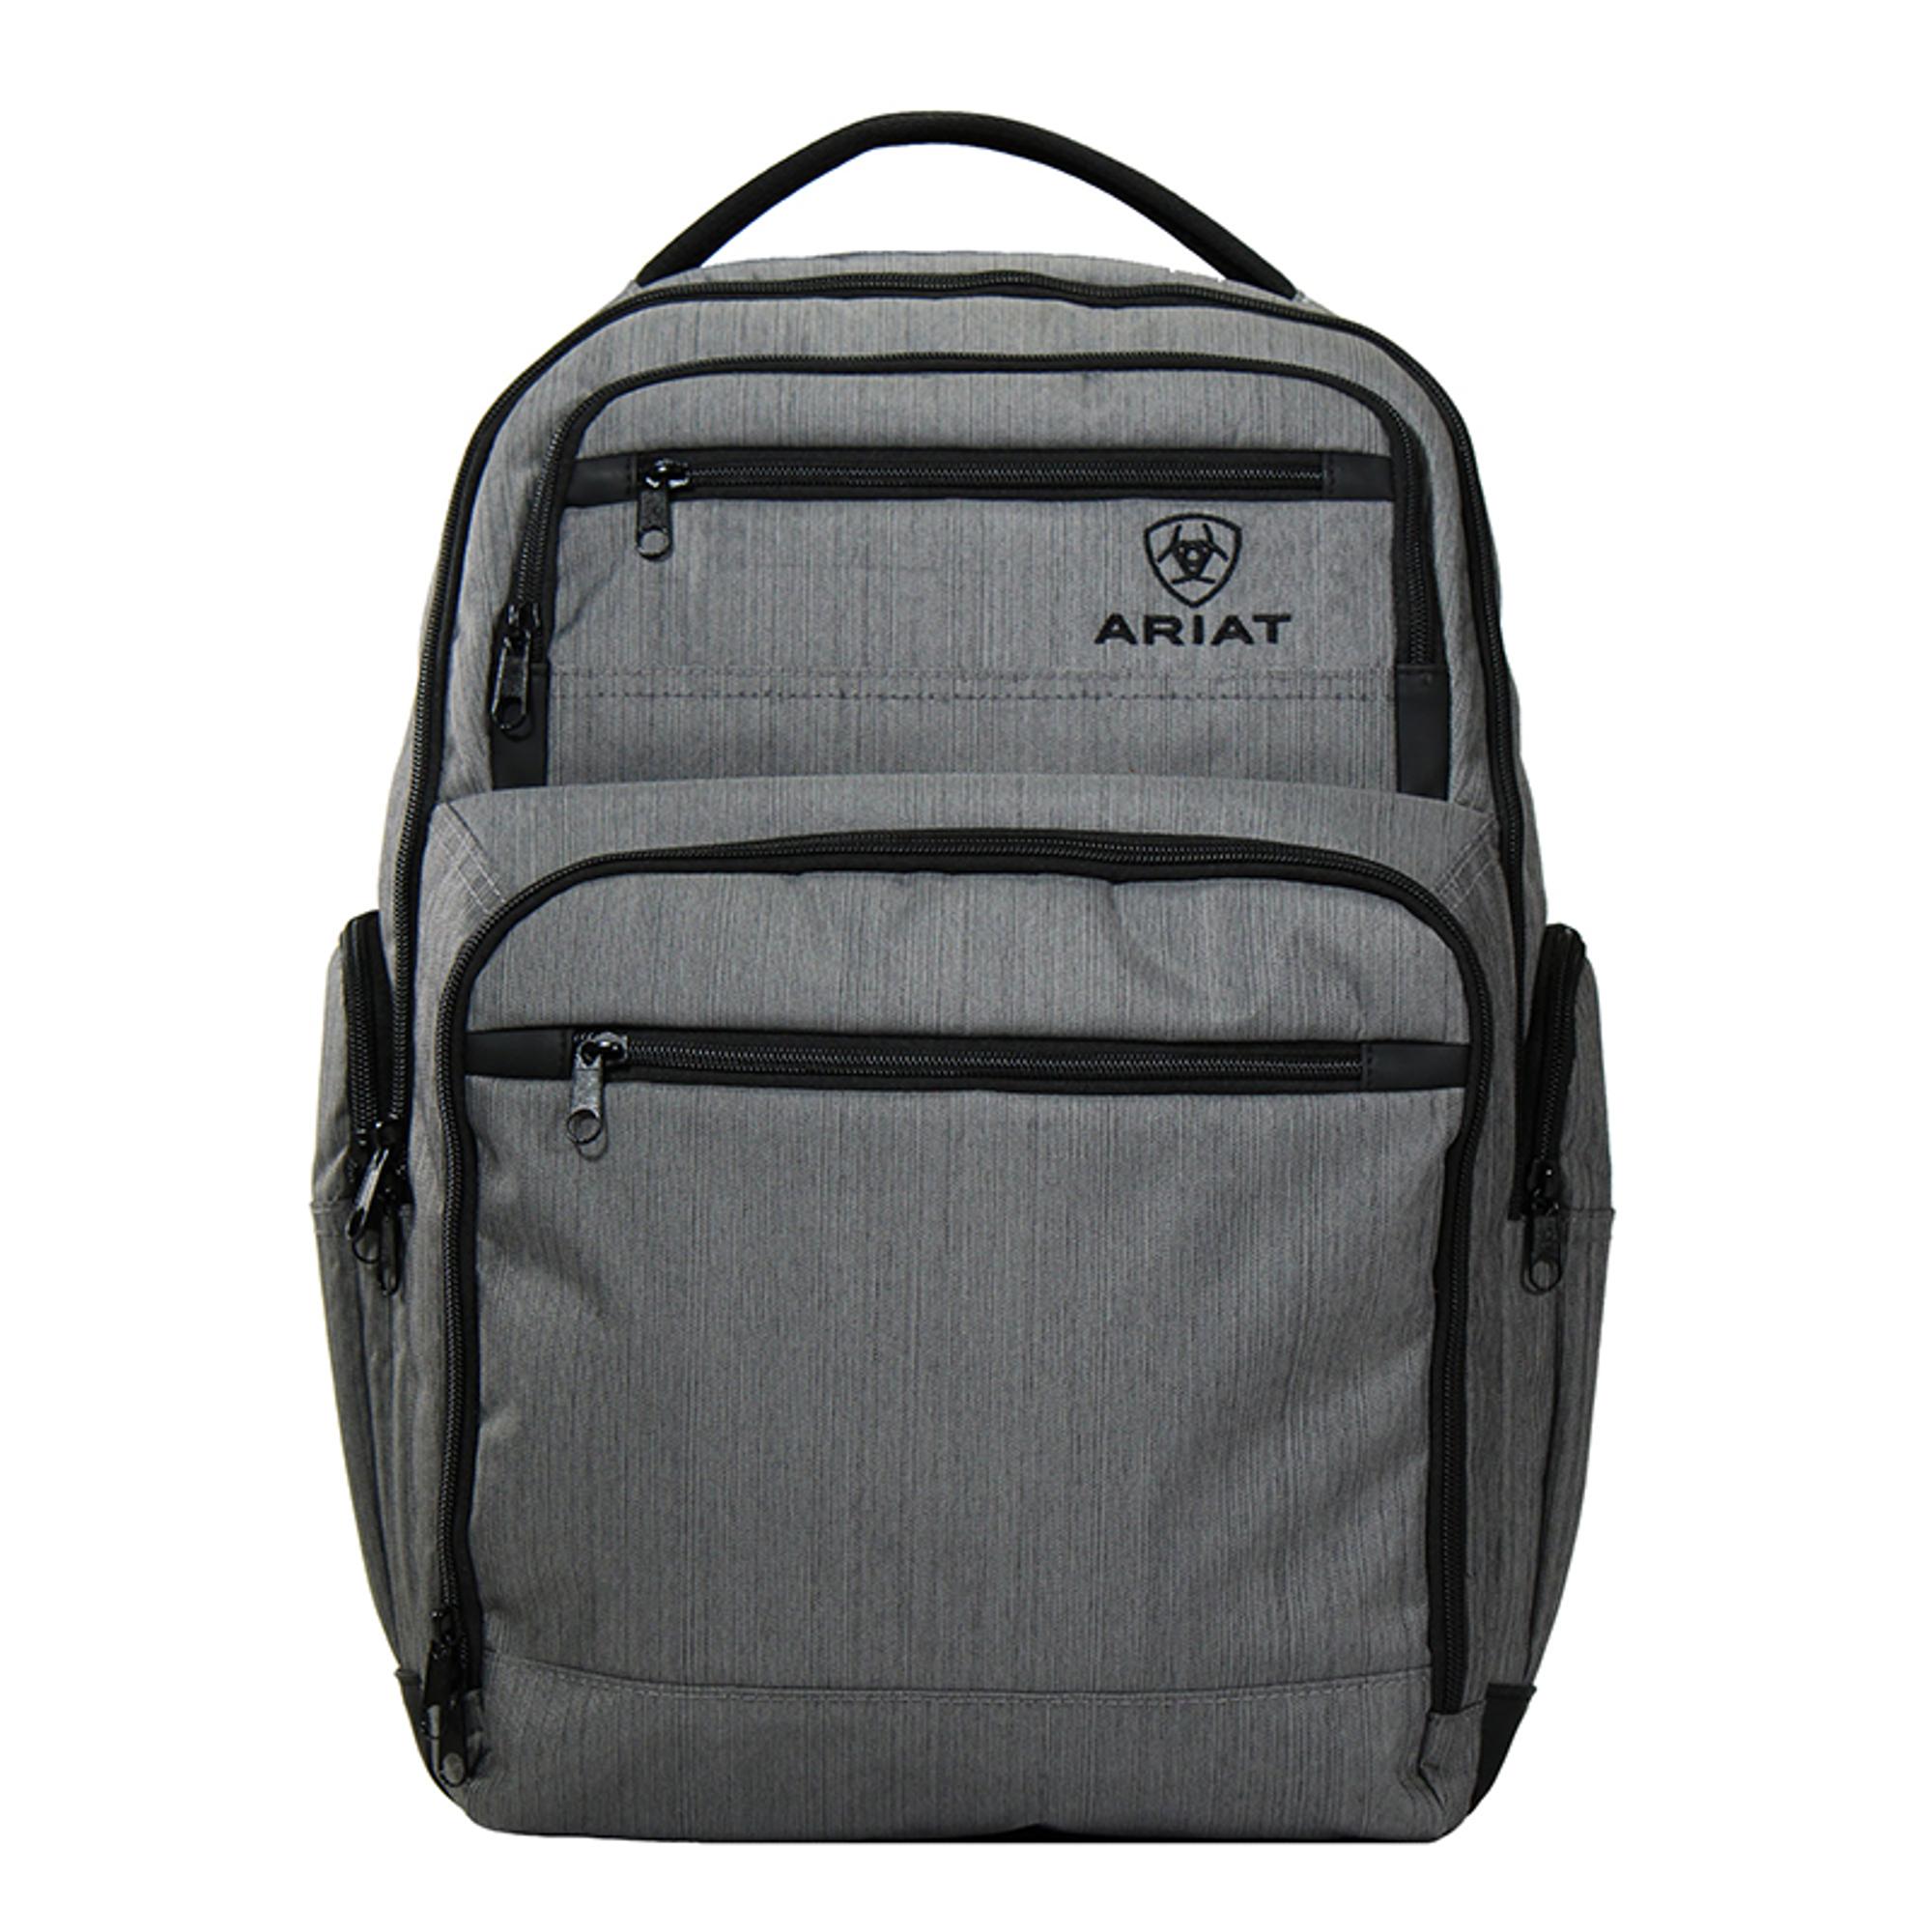 Ariat Canvas Laptop Backpack